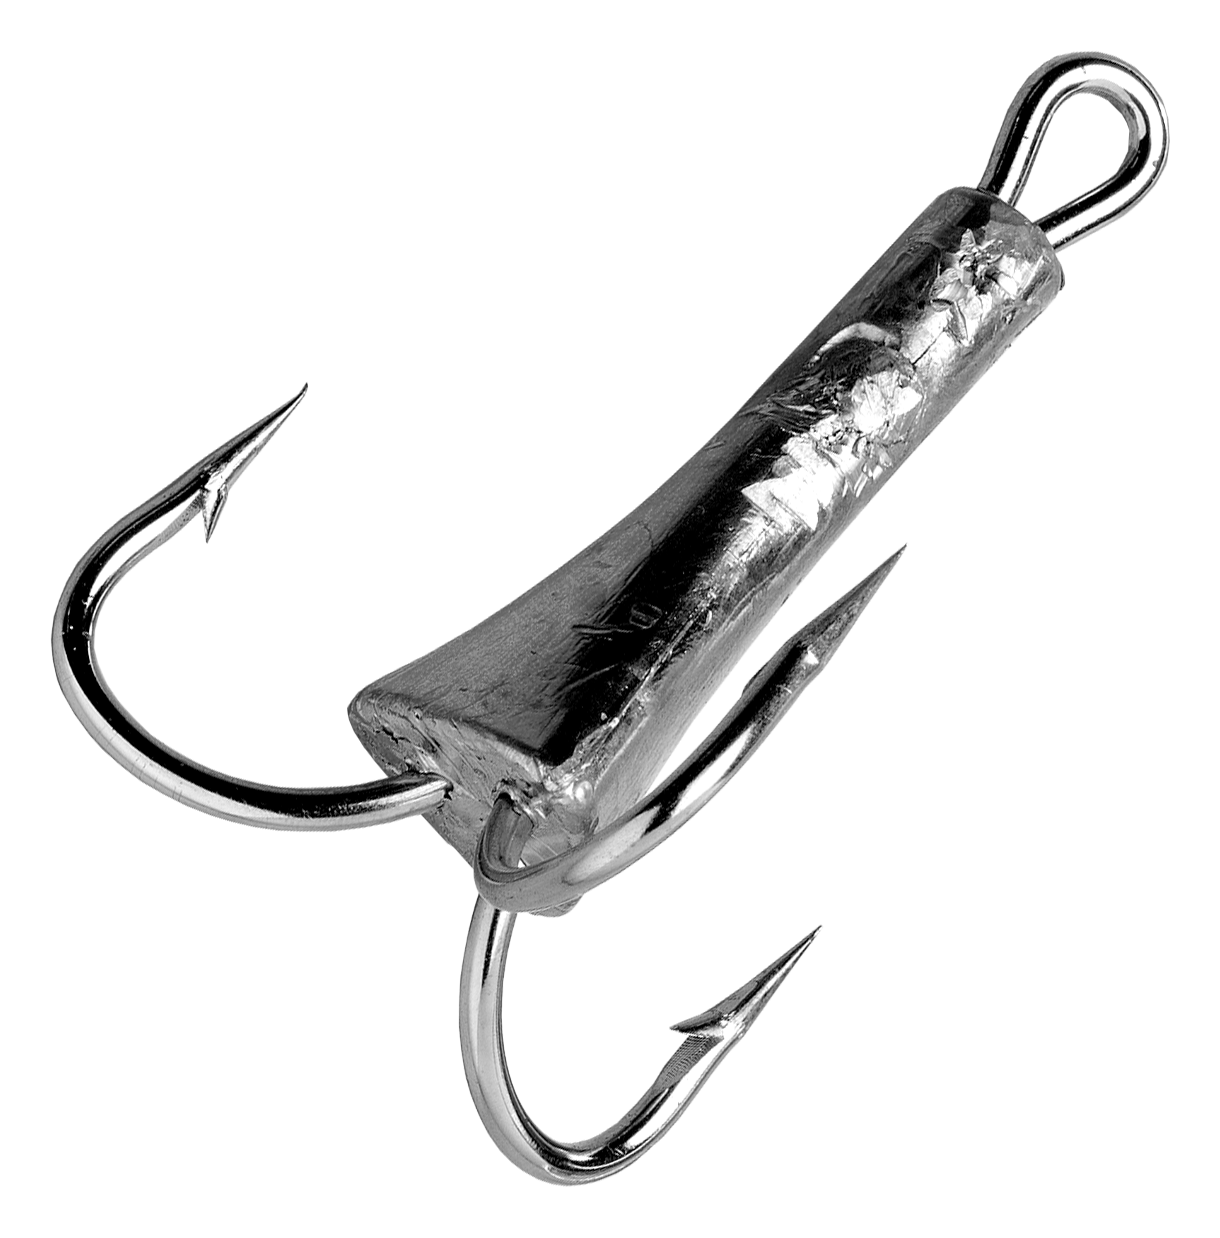 Bass Pro Shops Weighted Treble Hooks - Nickel